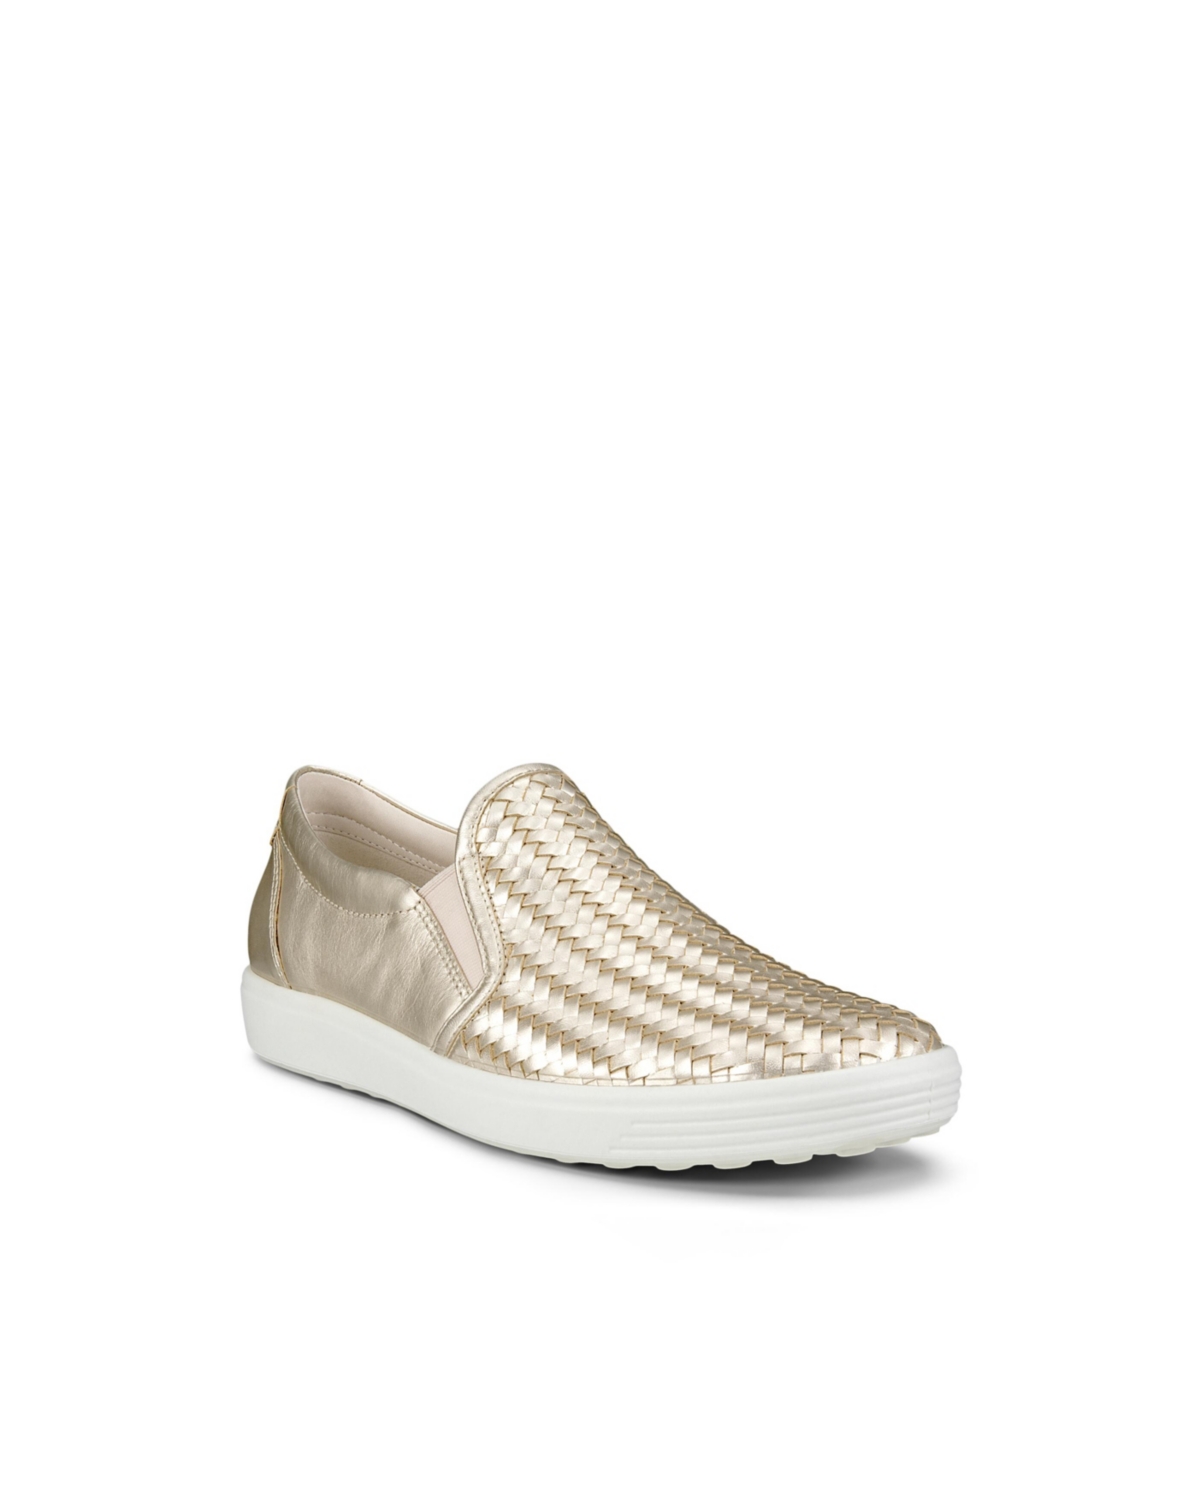 Women's Soft 7 Woven Slip-On Sneakers - Pure White Gold